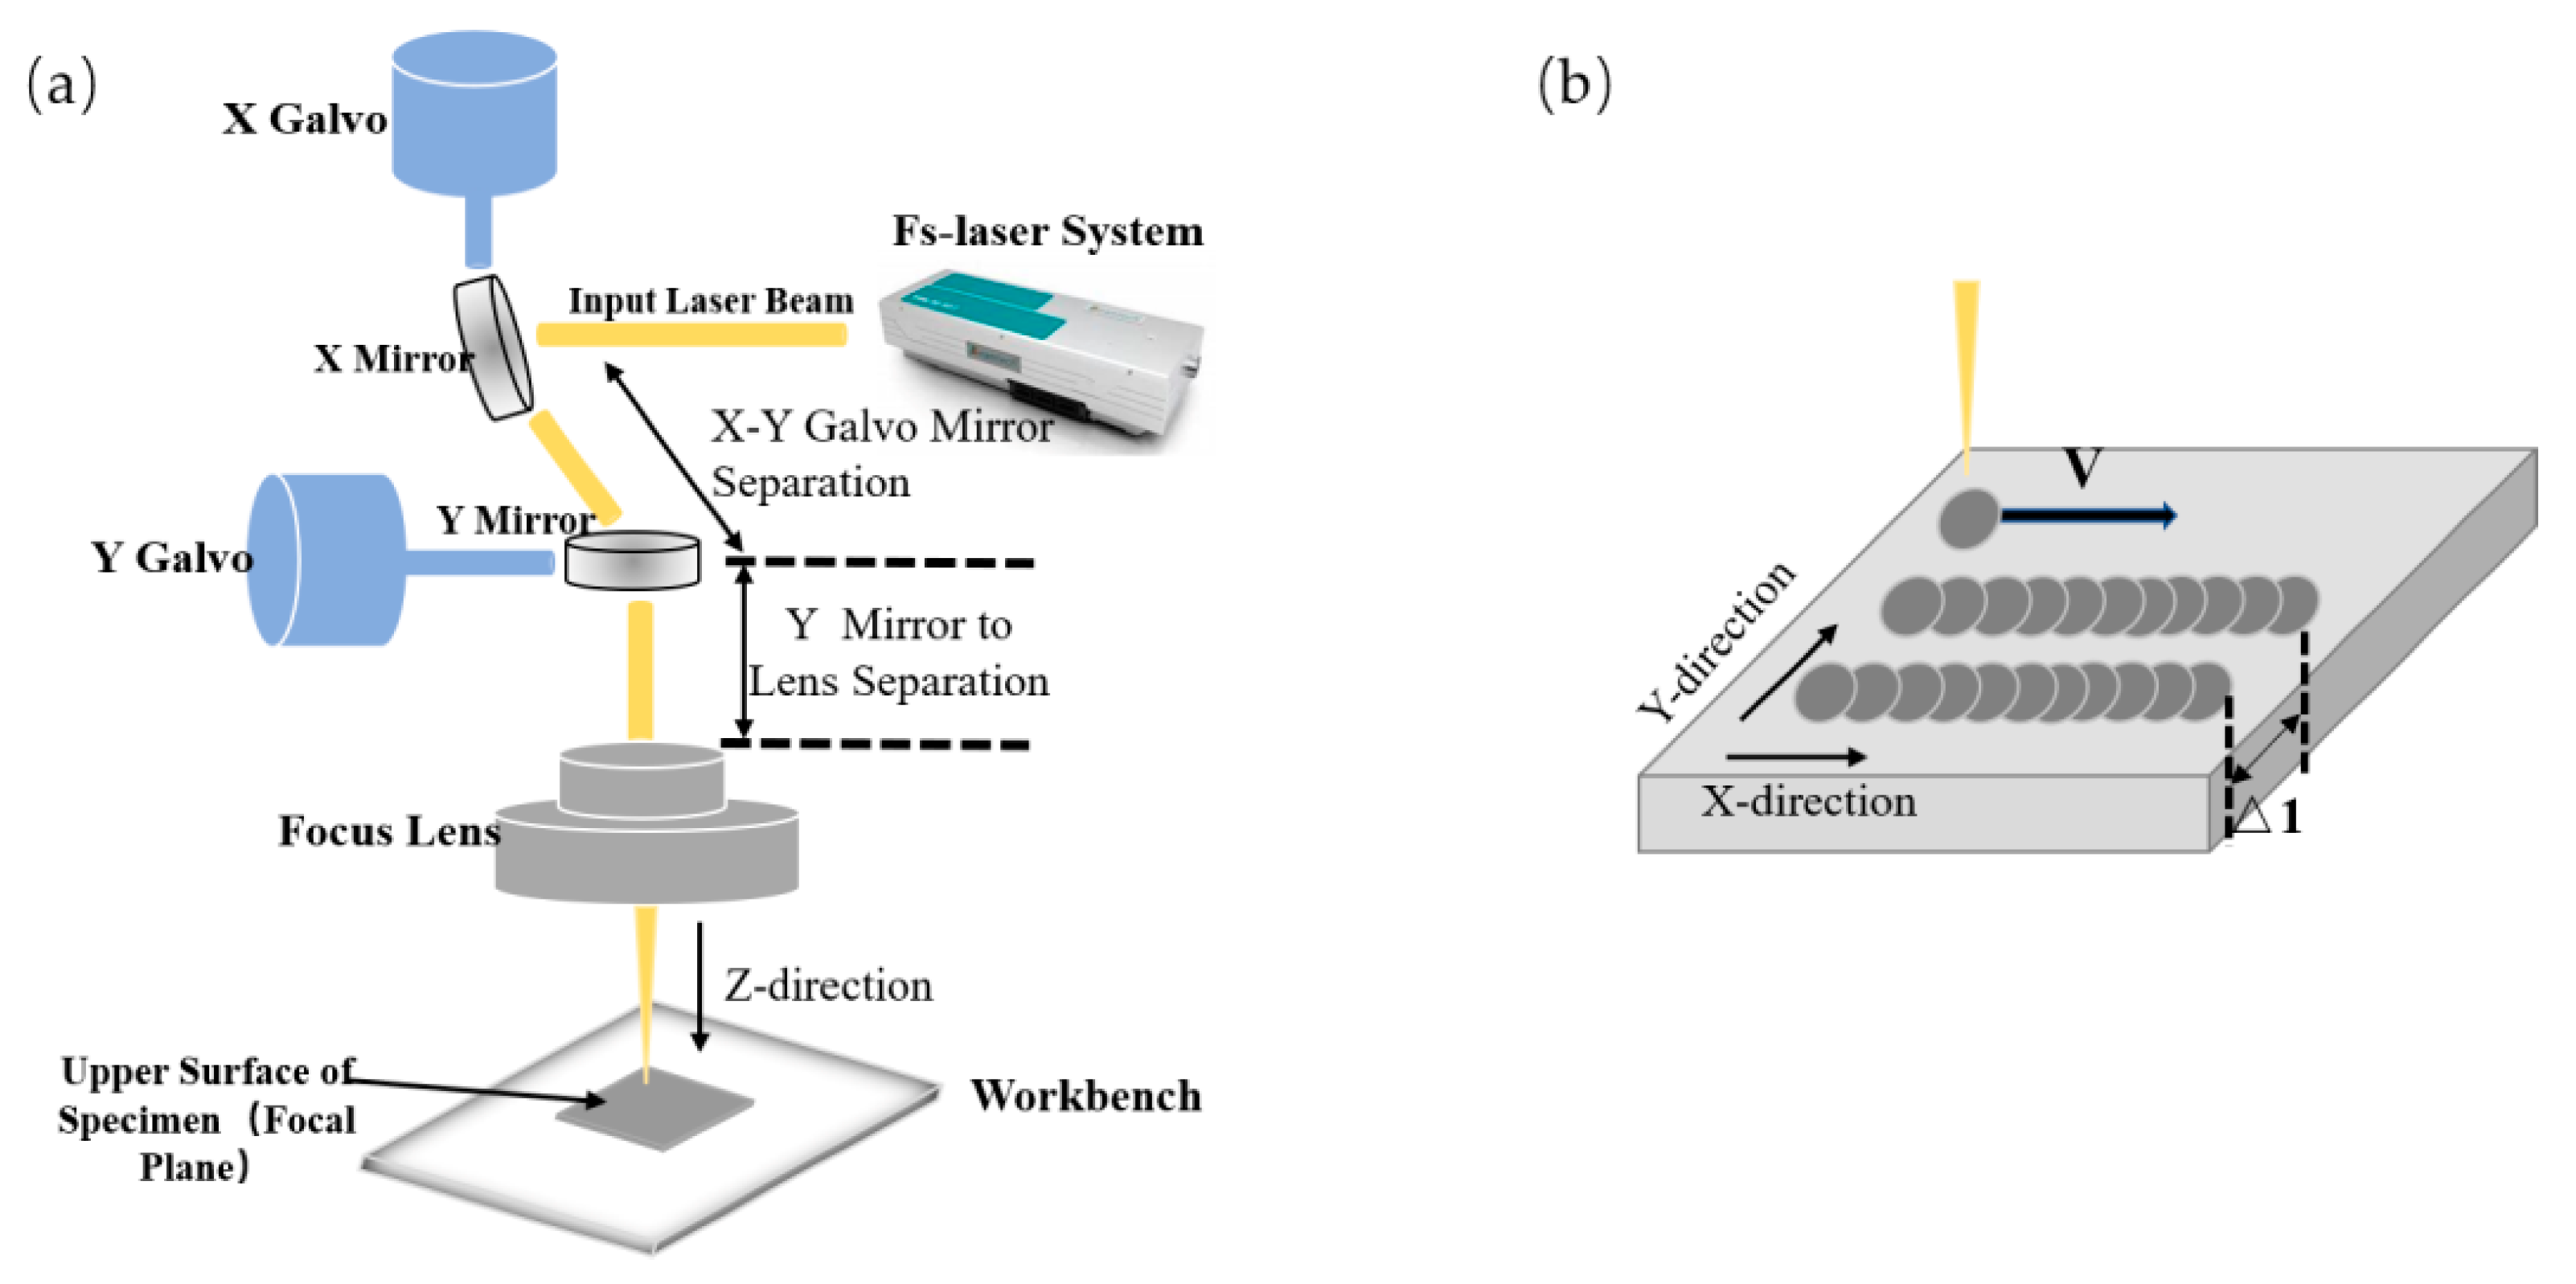 Advanced laser scanning for highly-efficient ablation and ultrafast surface  structuring: experiment and model